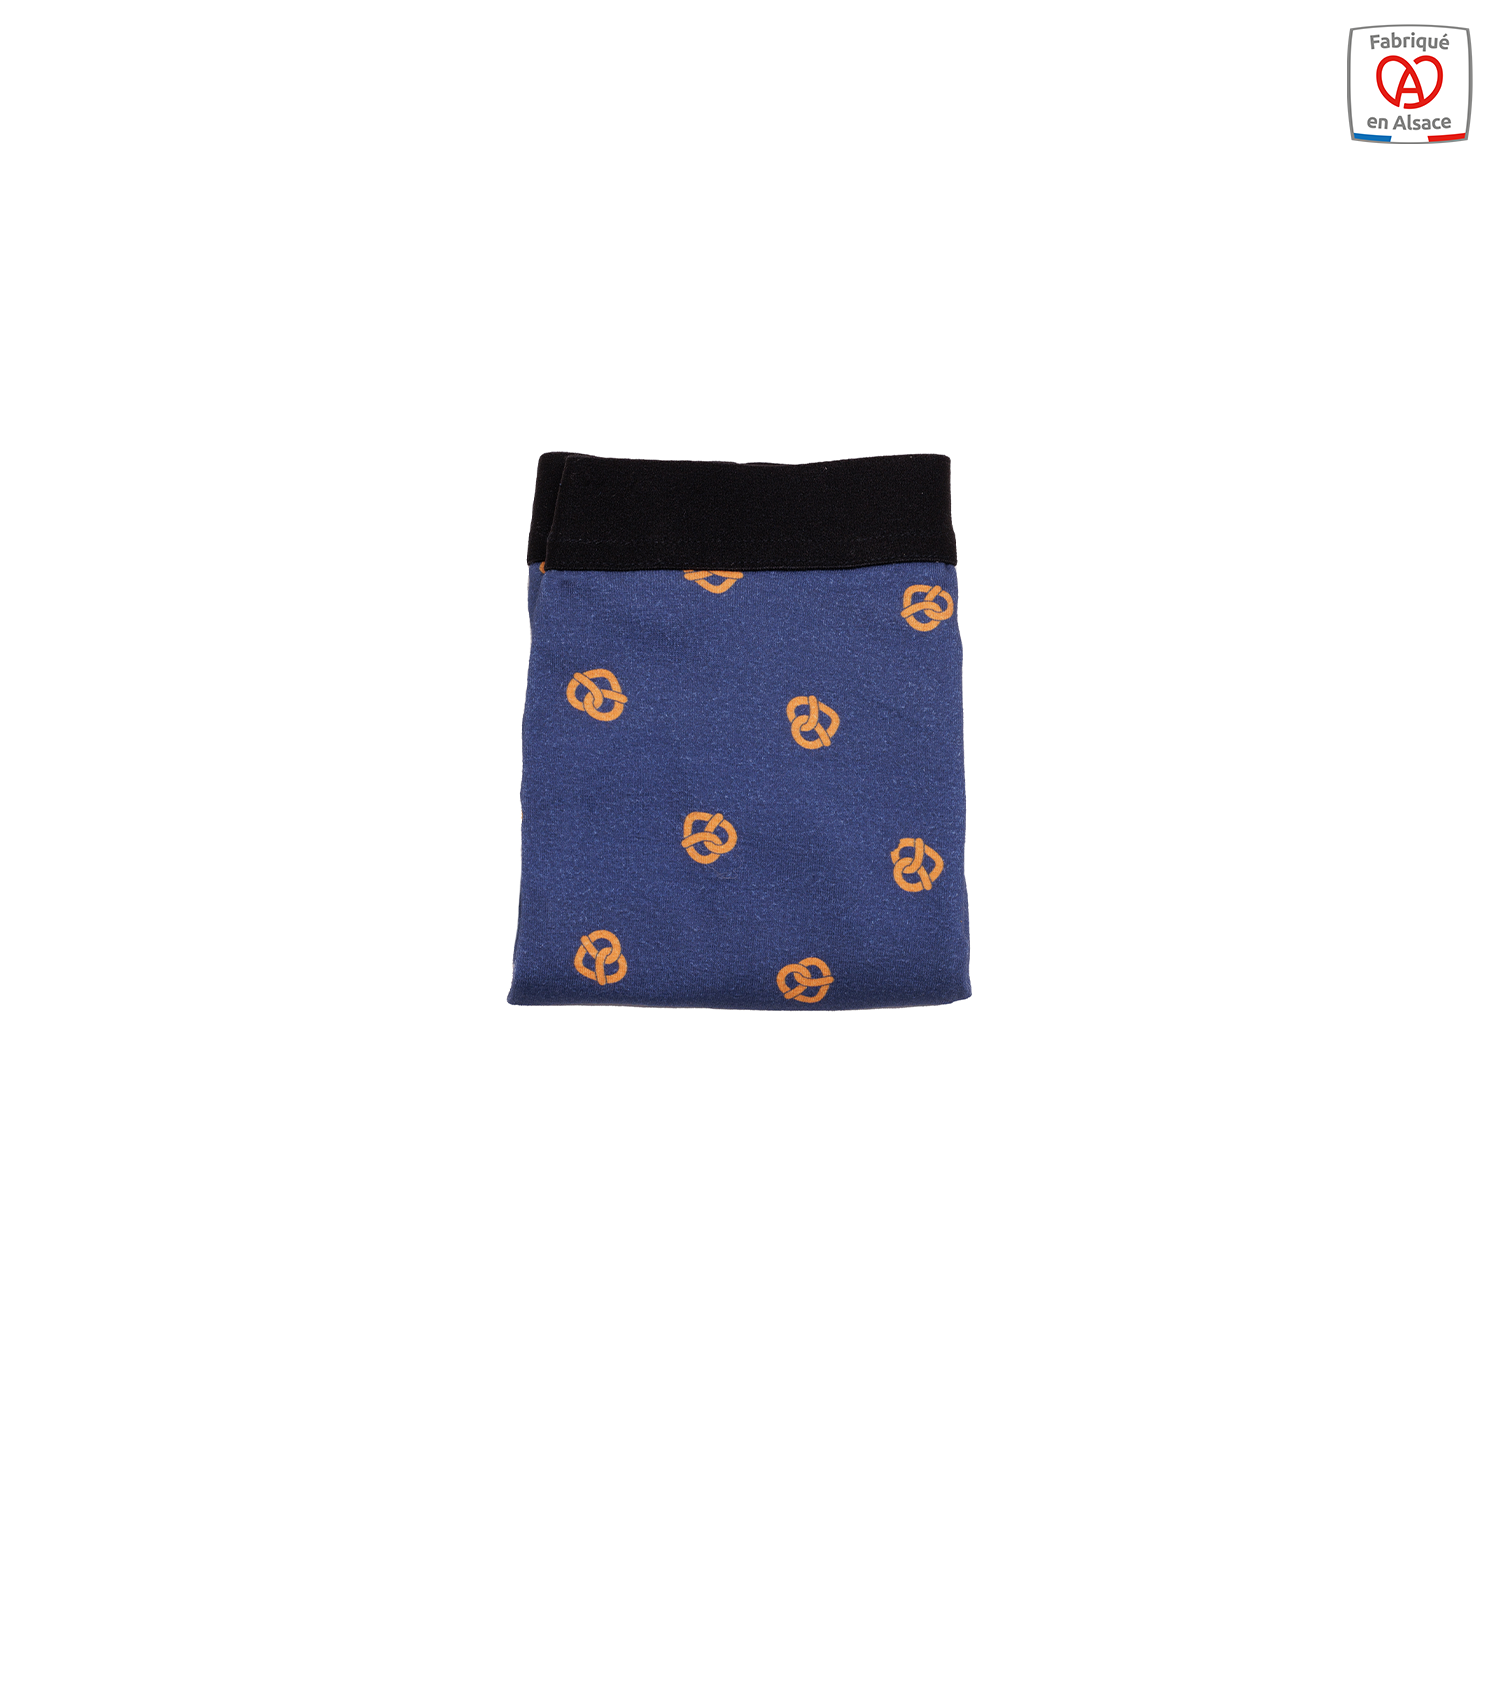 theim-boxer-homme-made-in-france-bretzel-1500-x-1700-px